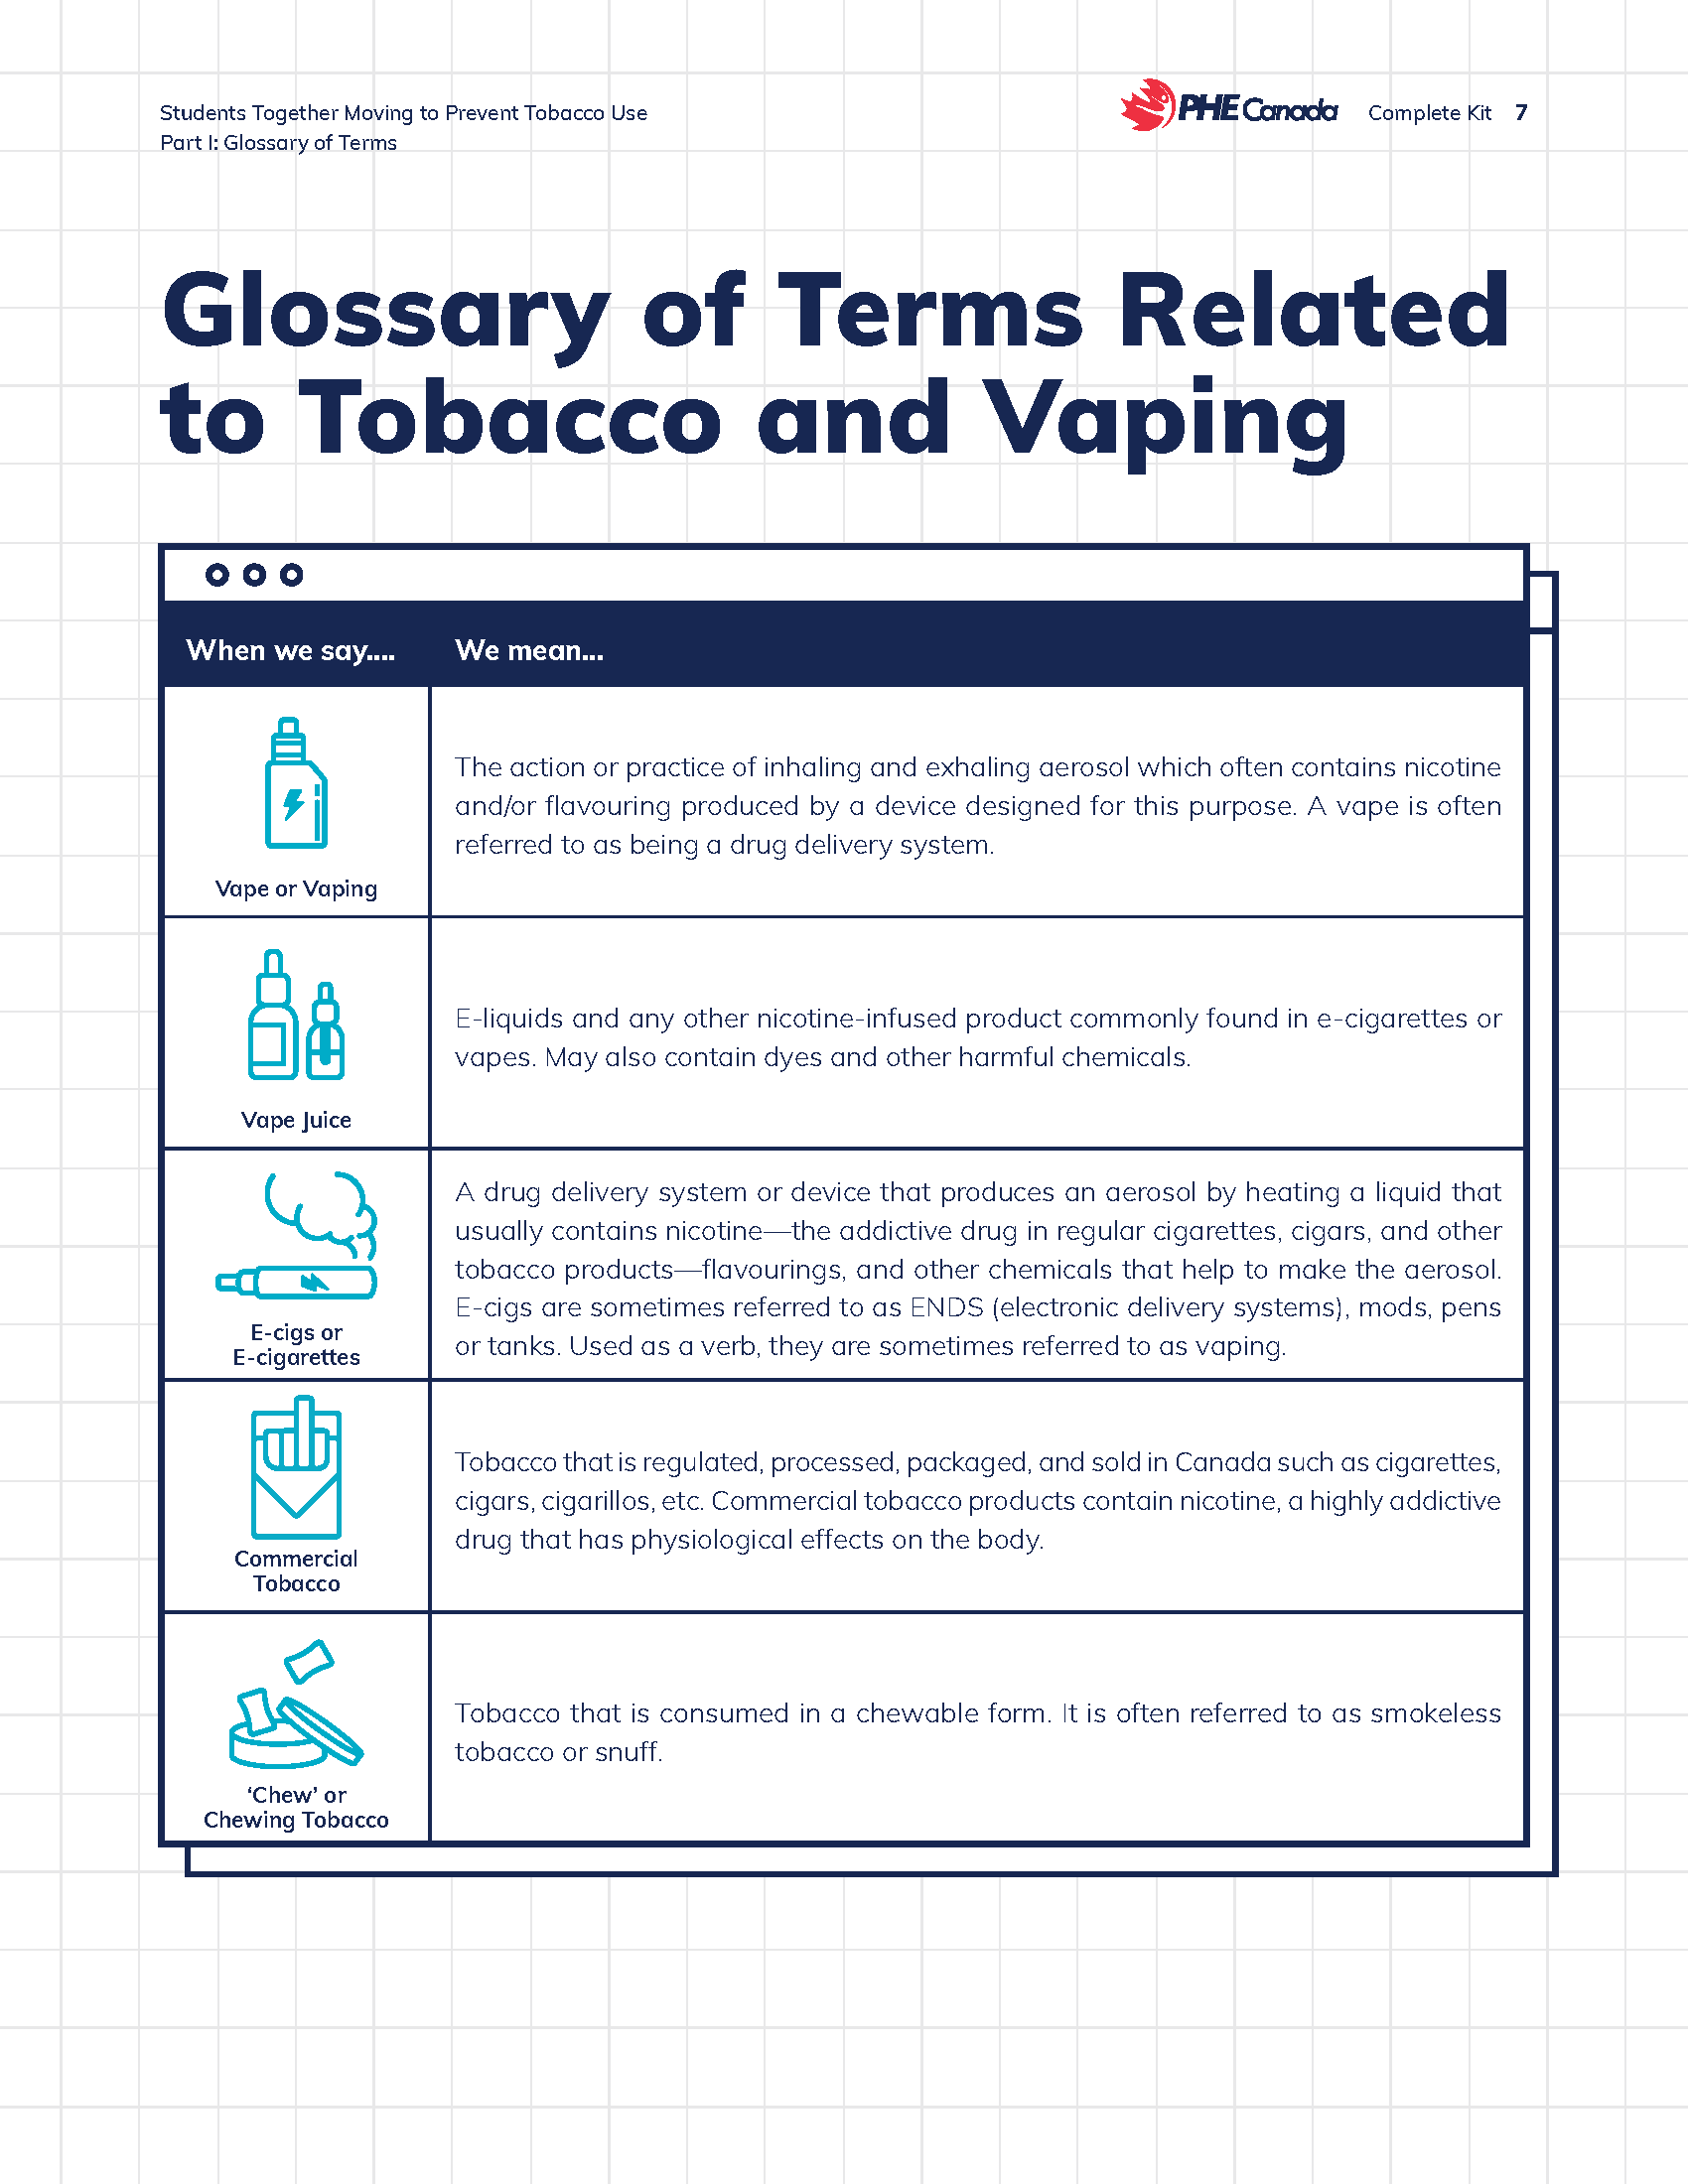 STOMP Glossary of Terms